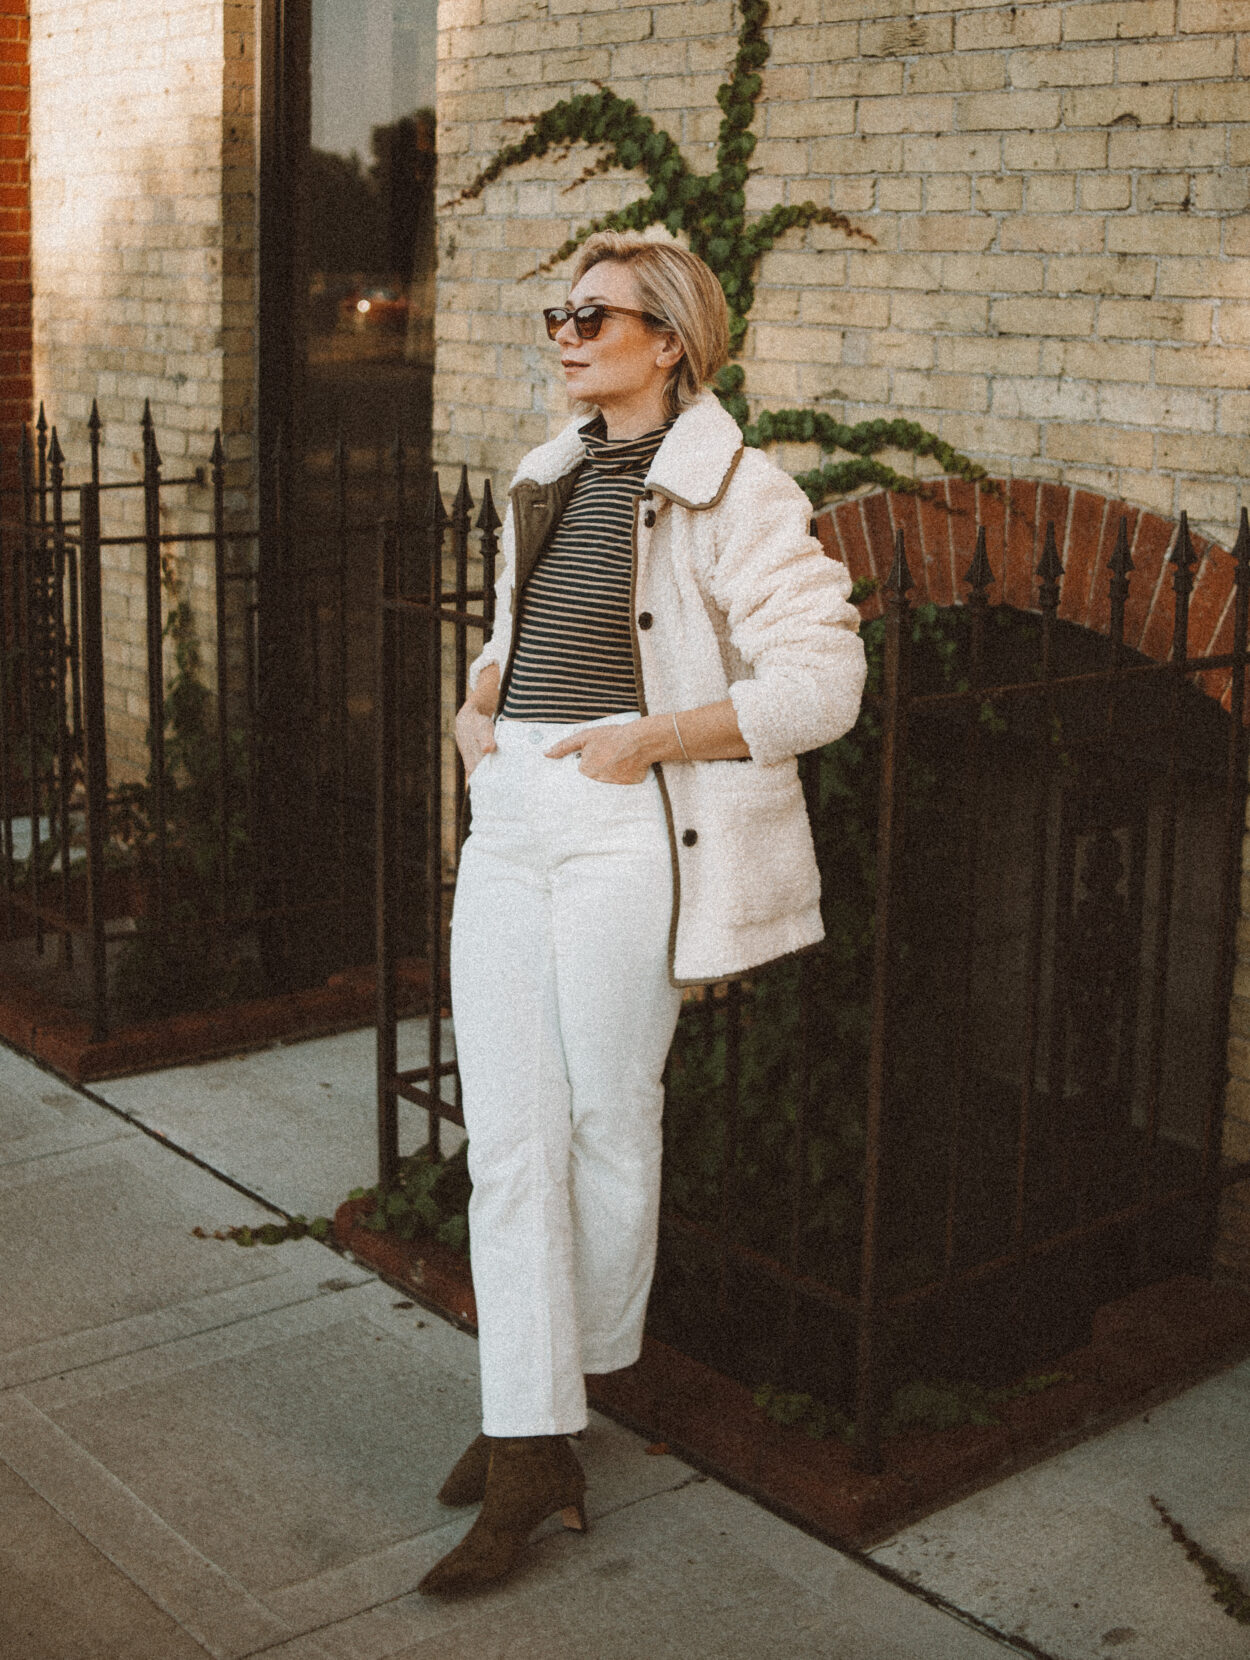 Karin Emily wears the perfect pair of corduroy pants with a striped turtleneck, sherpa jacket, and heeled booties